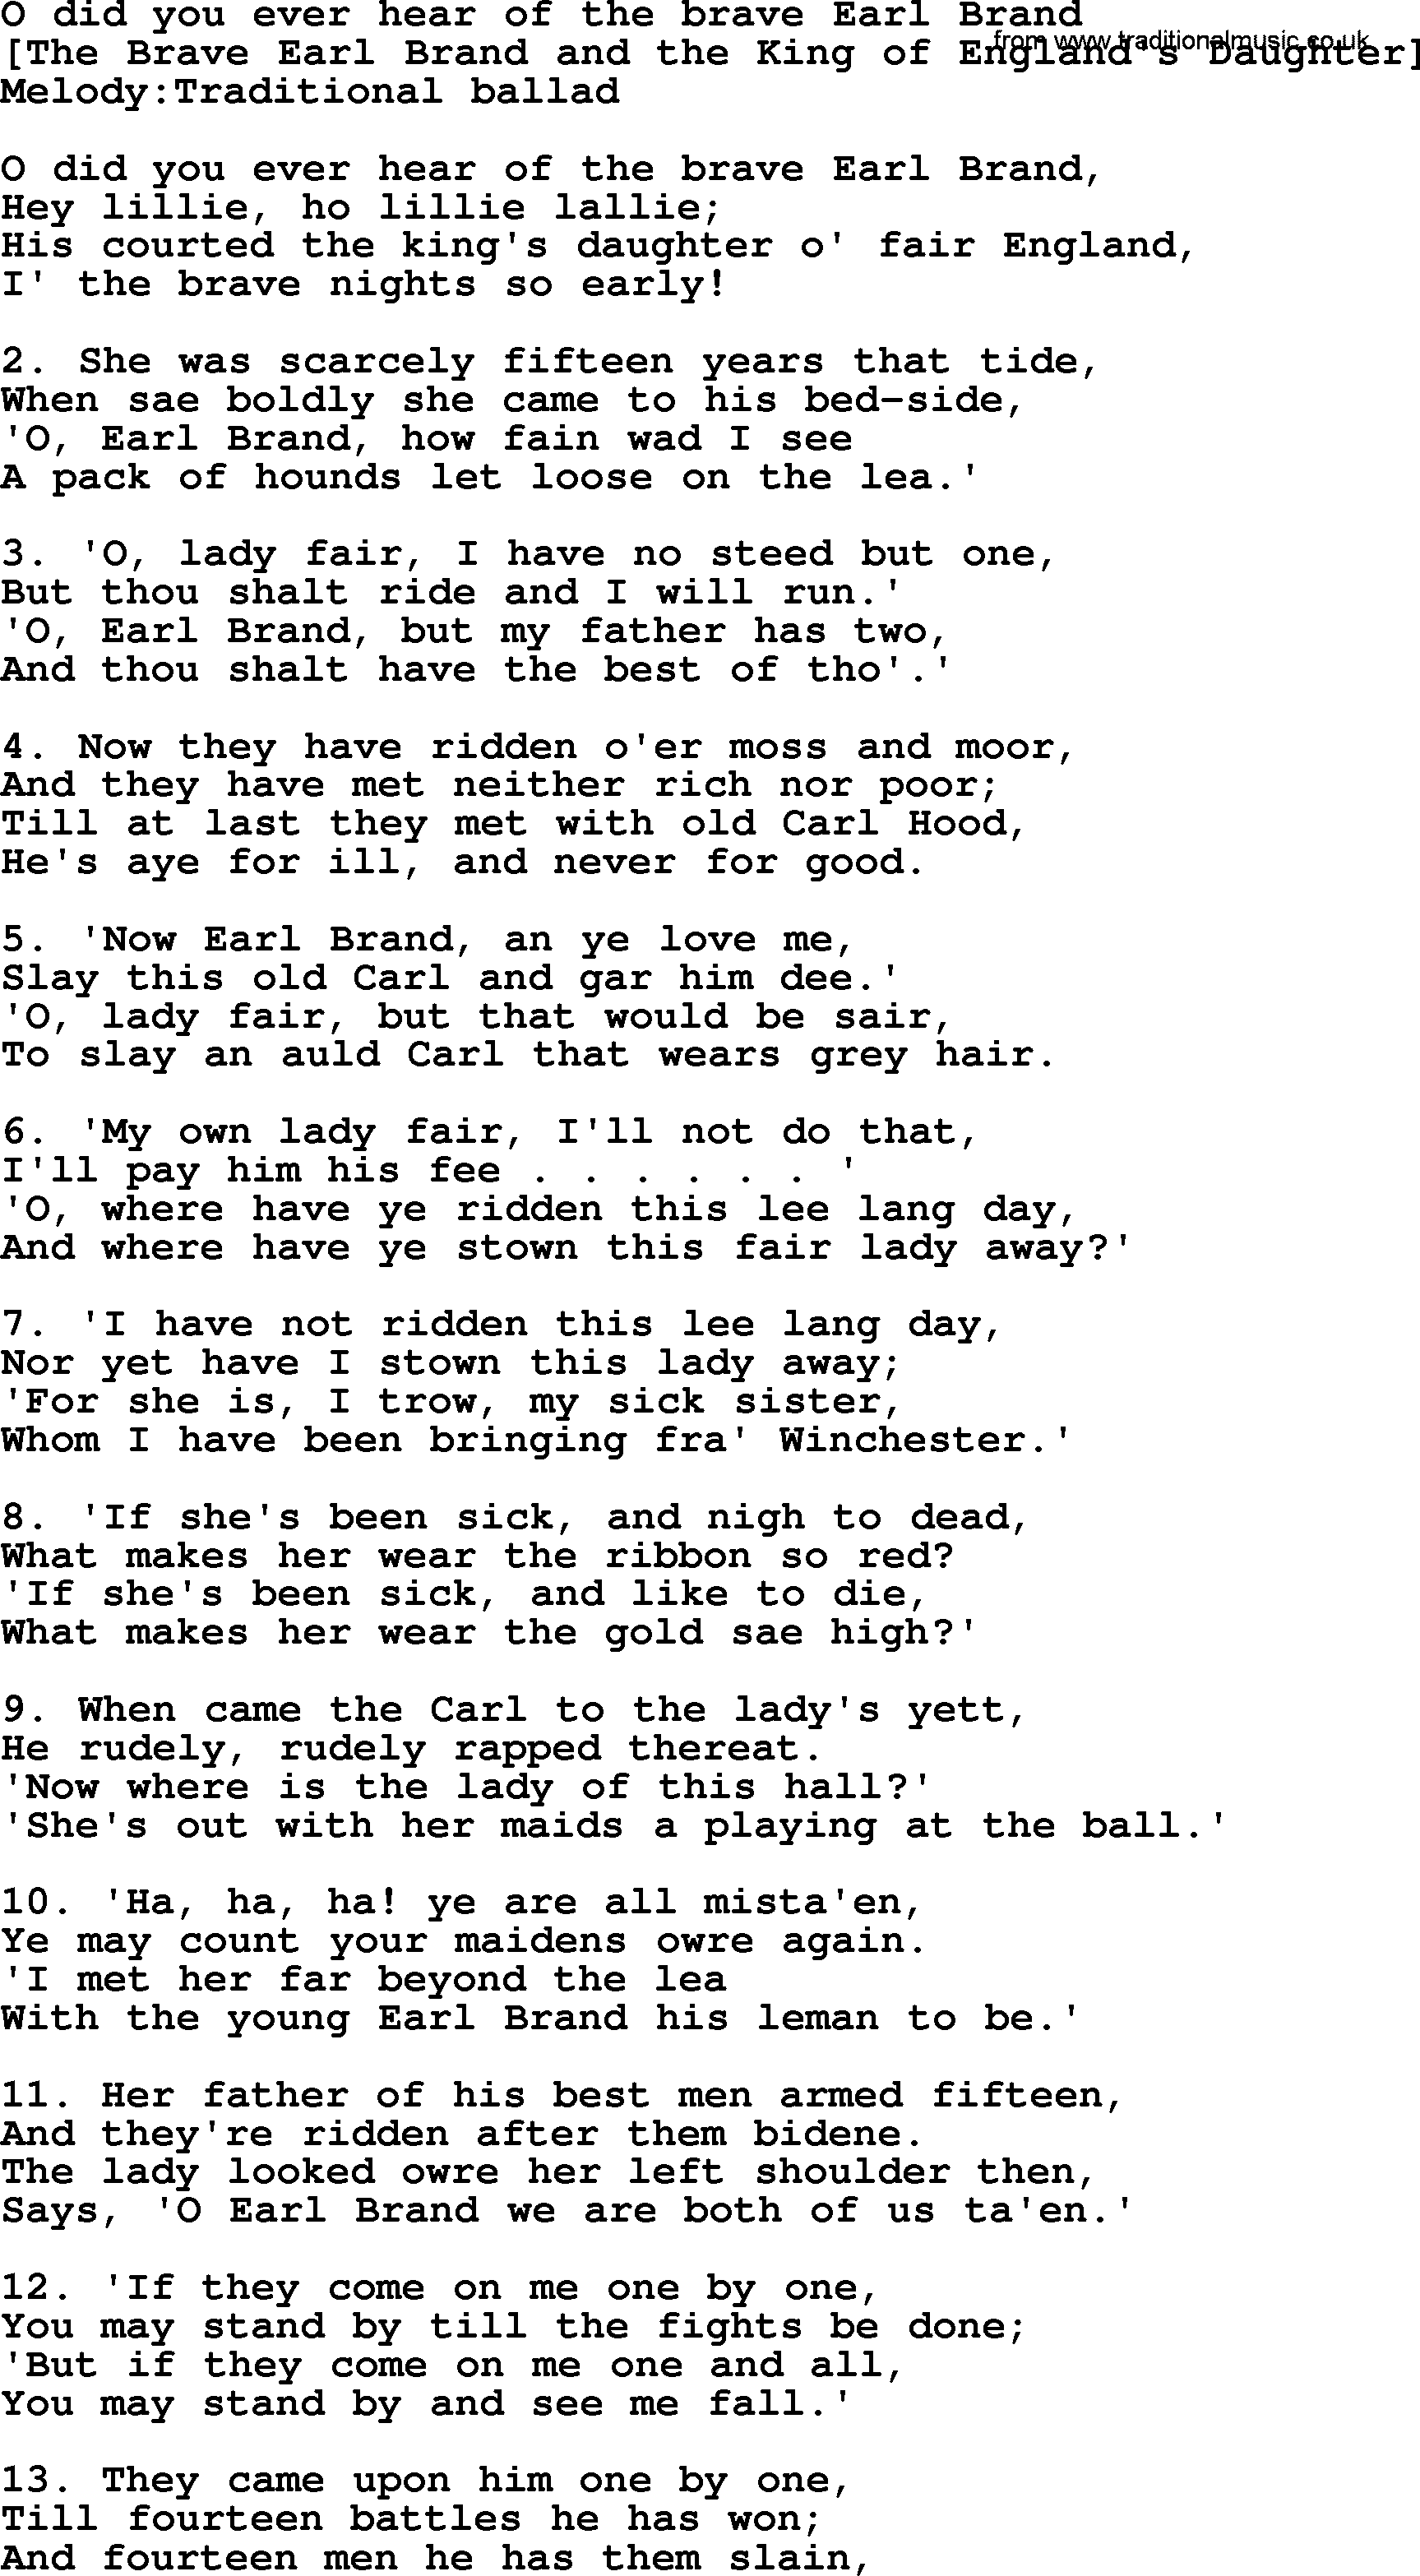 Old English Song: O Did You Ever Hear Of The Brave Earl Brand lyrics